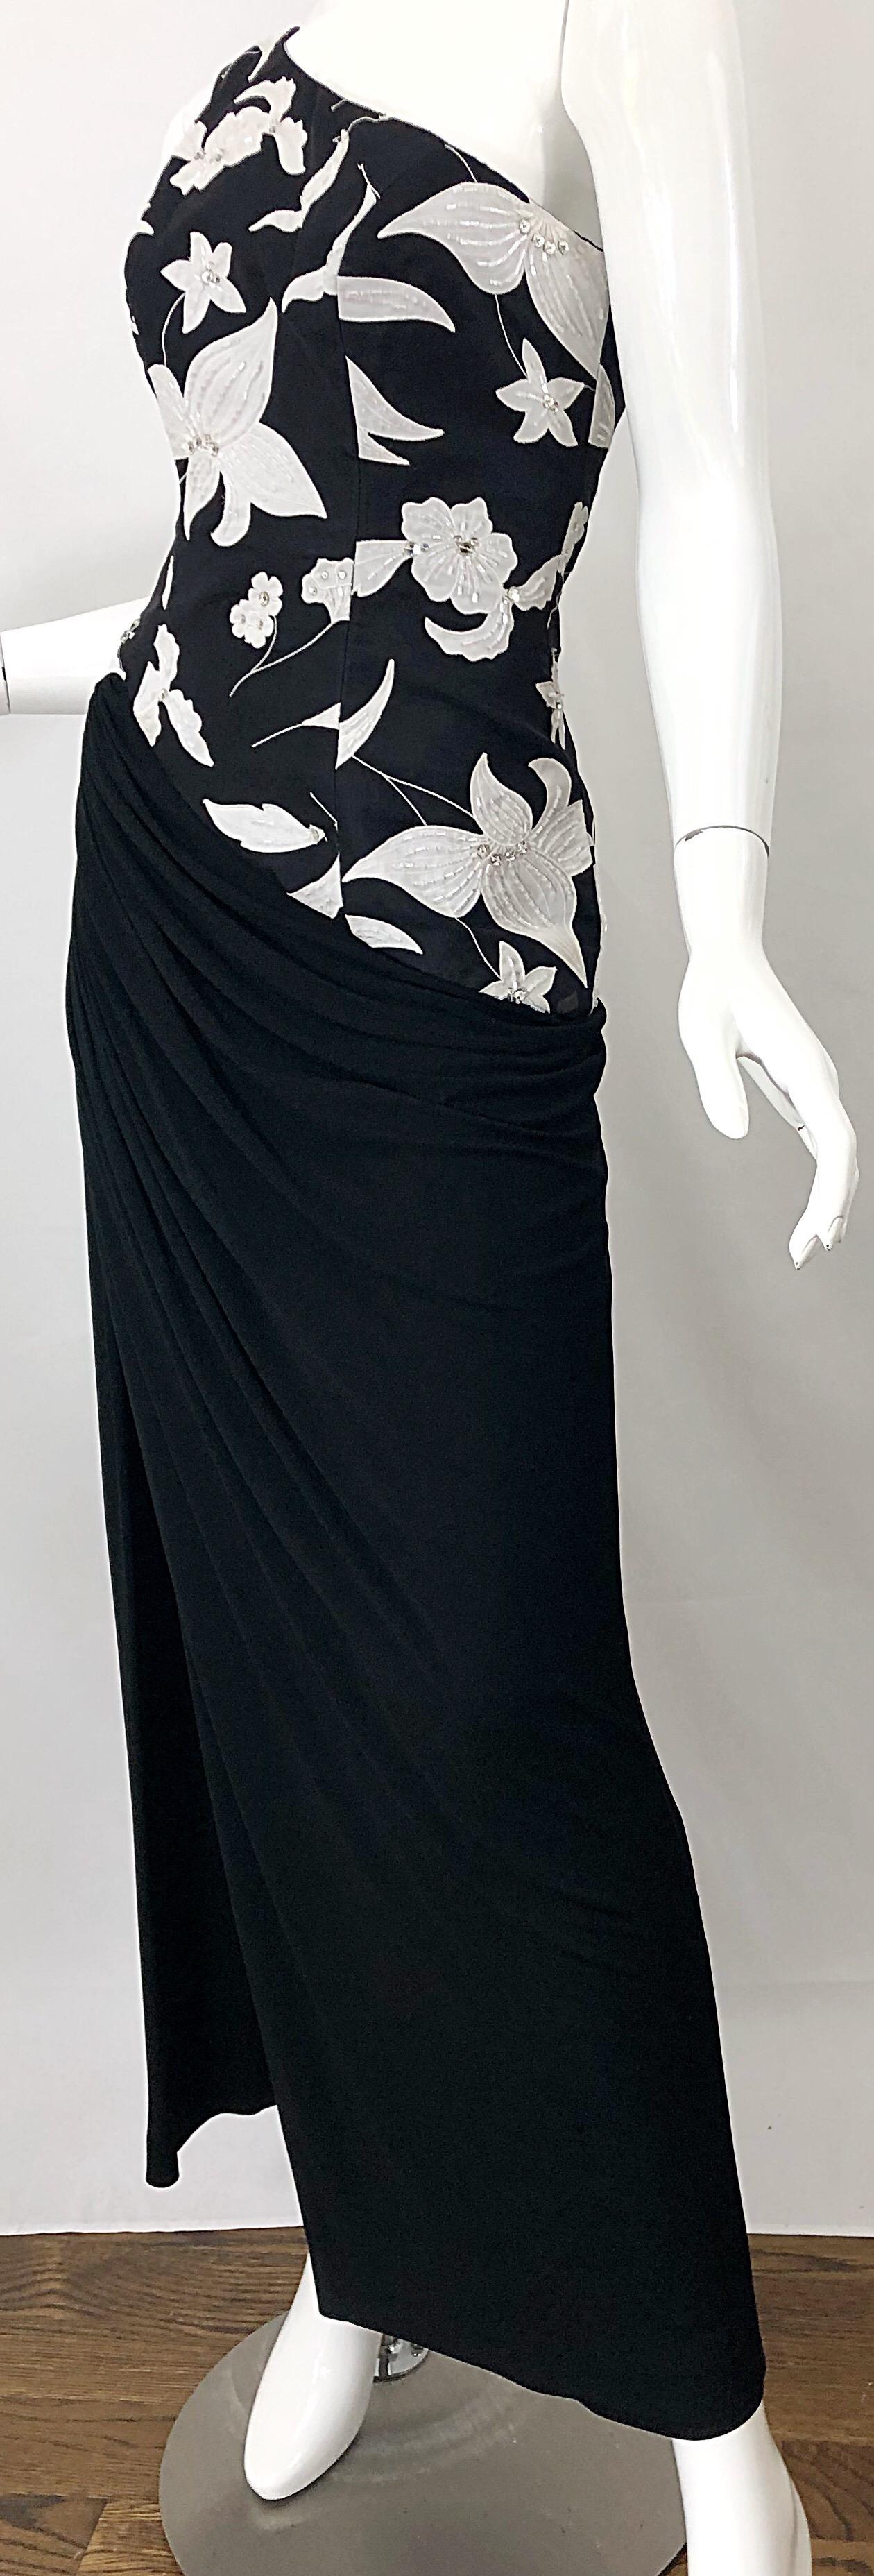 Vintage Ruben Panis Black and White Beaded Sequin One Shoulder 80s Evening Gown 5